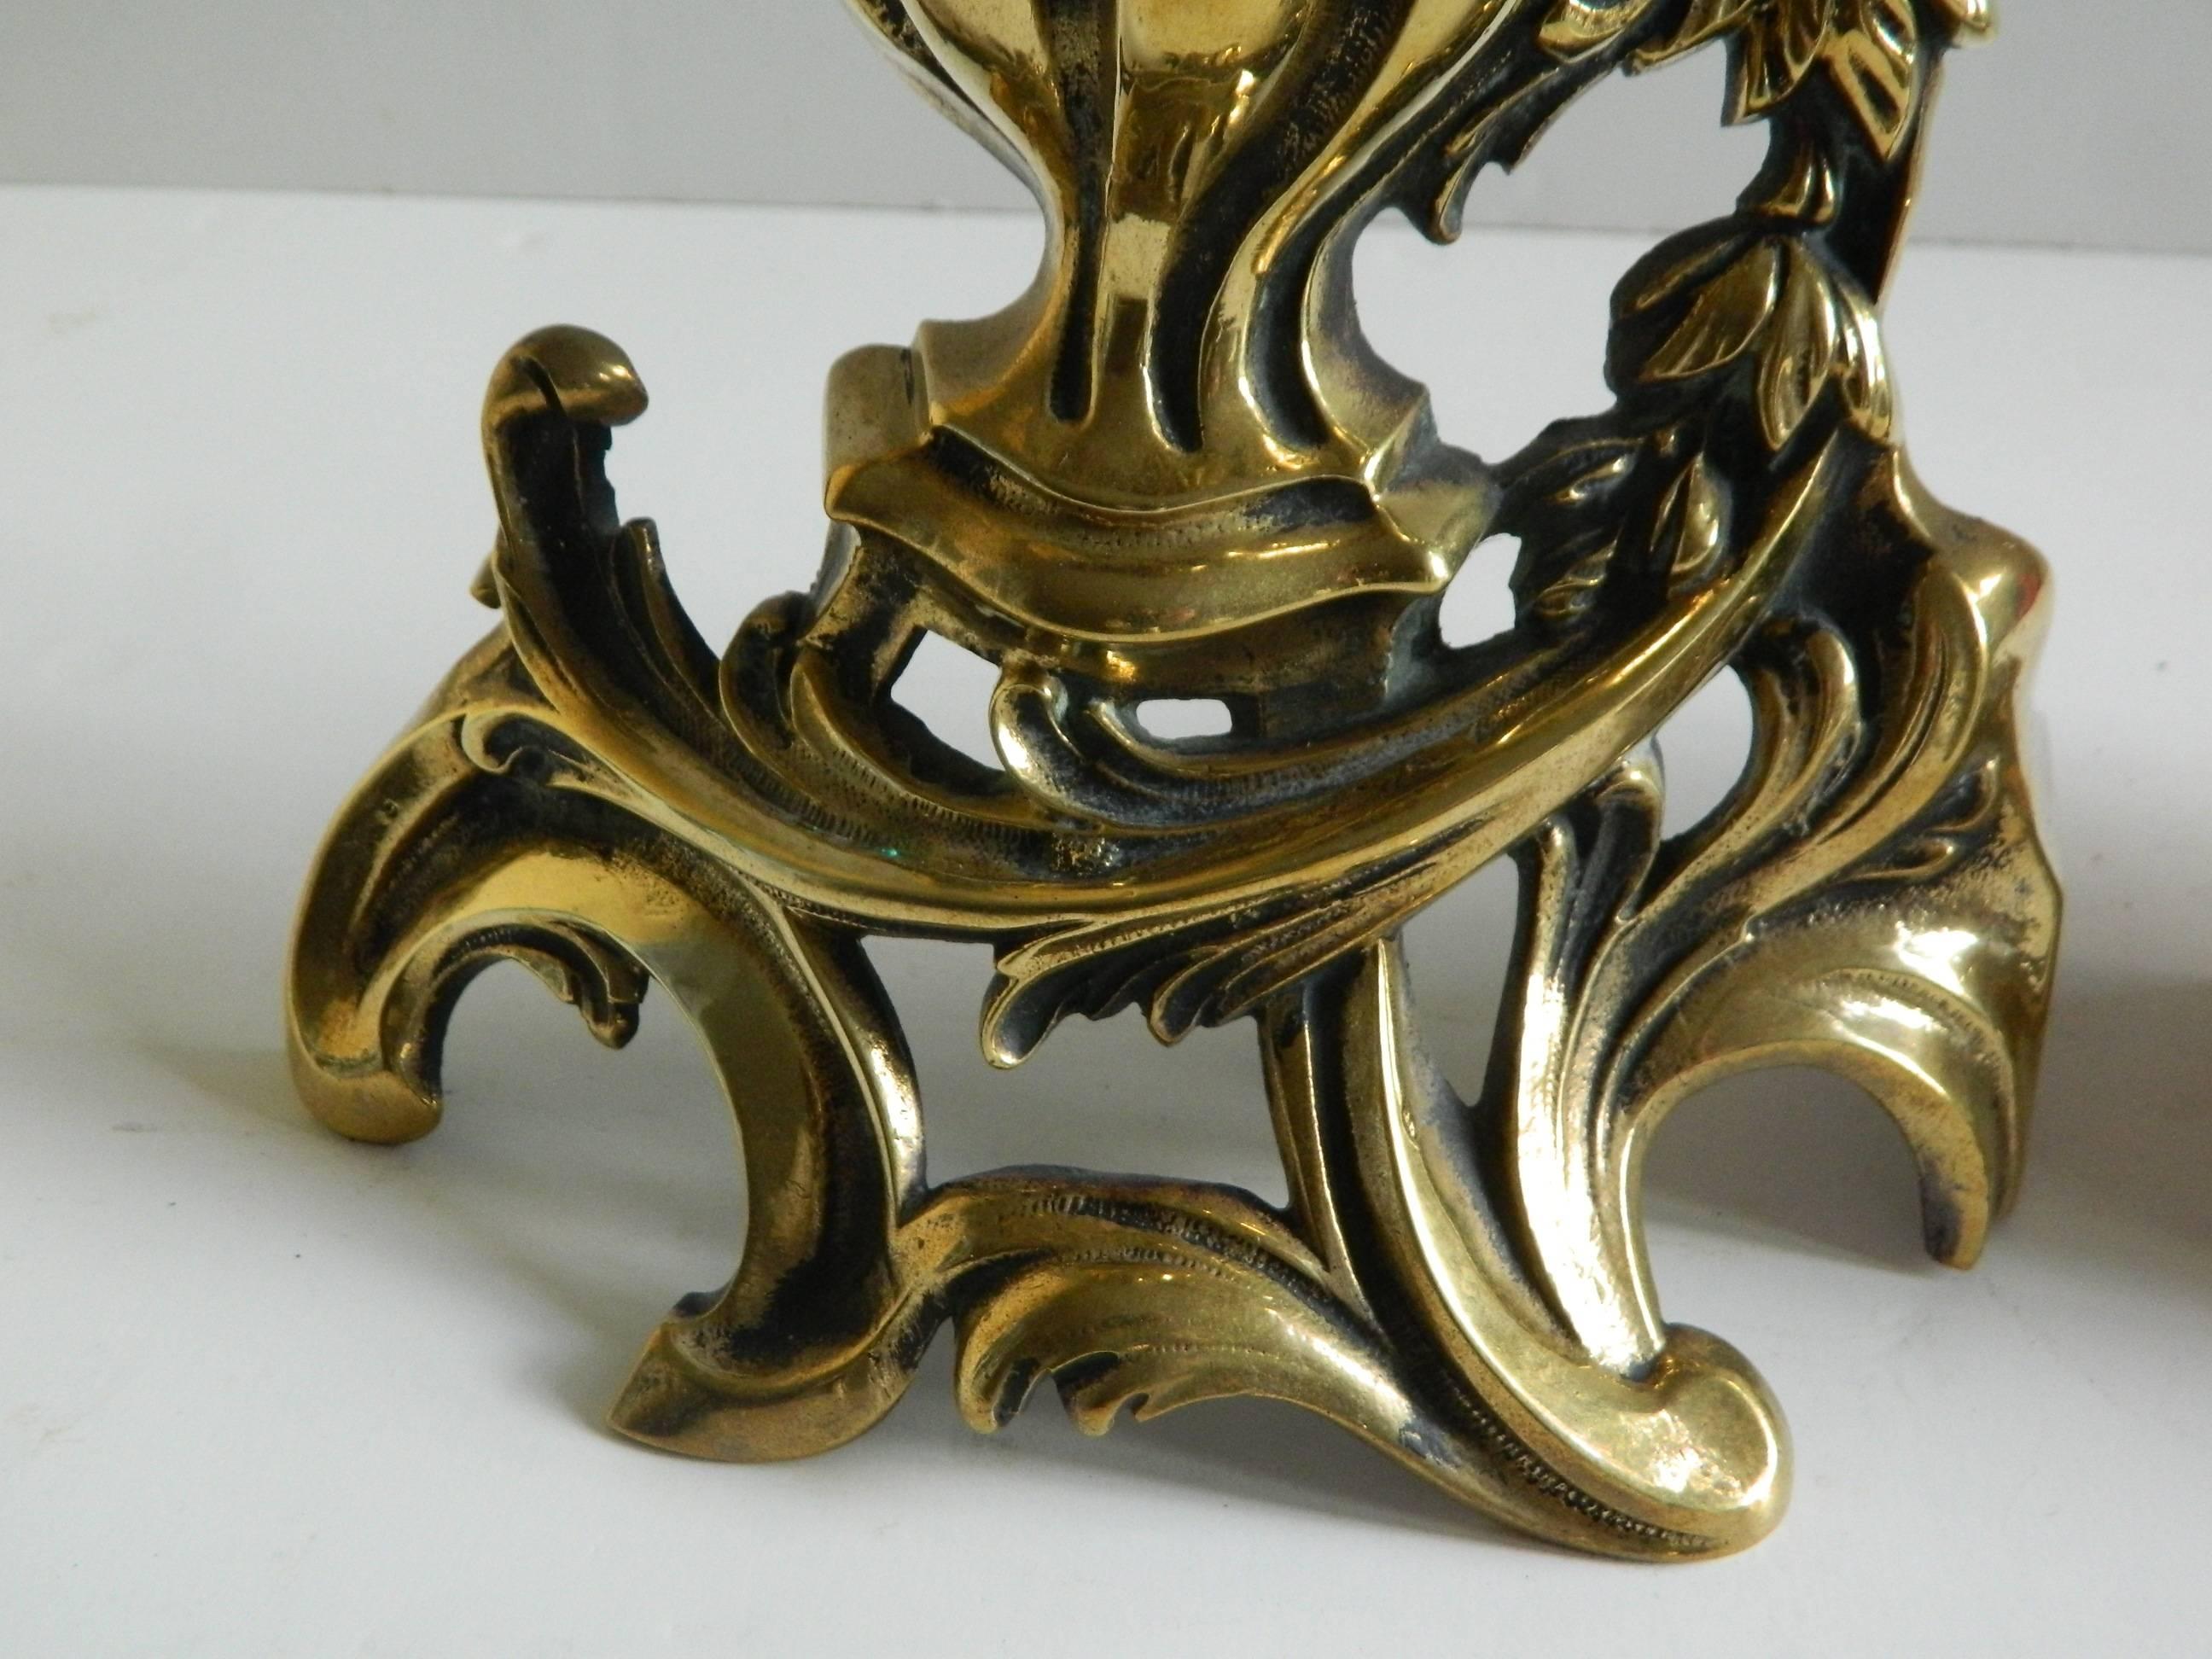 Pair of Brass Small Chenets or Andirons with Flame Finials, 19th Century In Good Condition For Sale In Savannah, GA